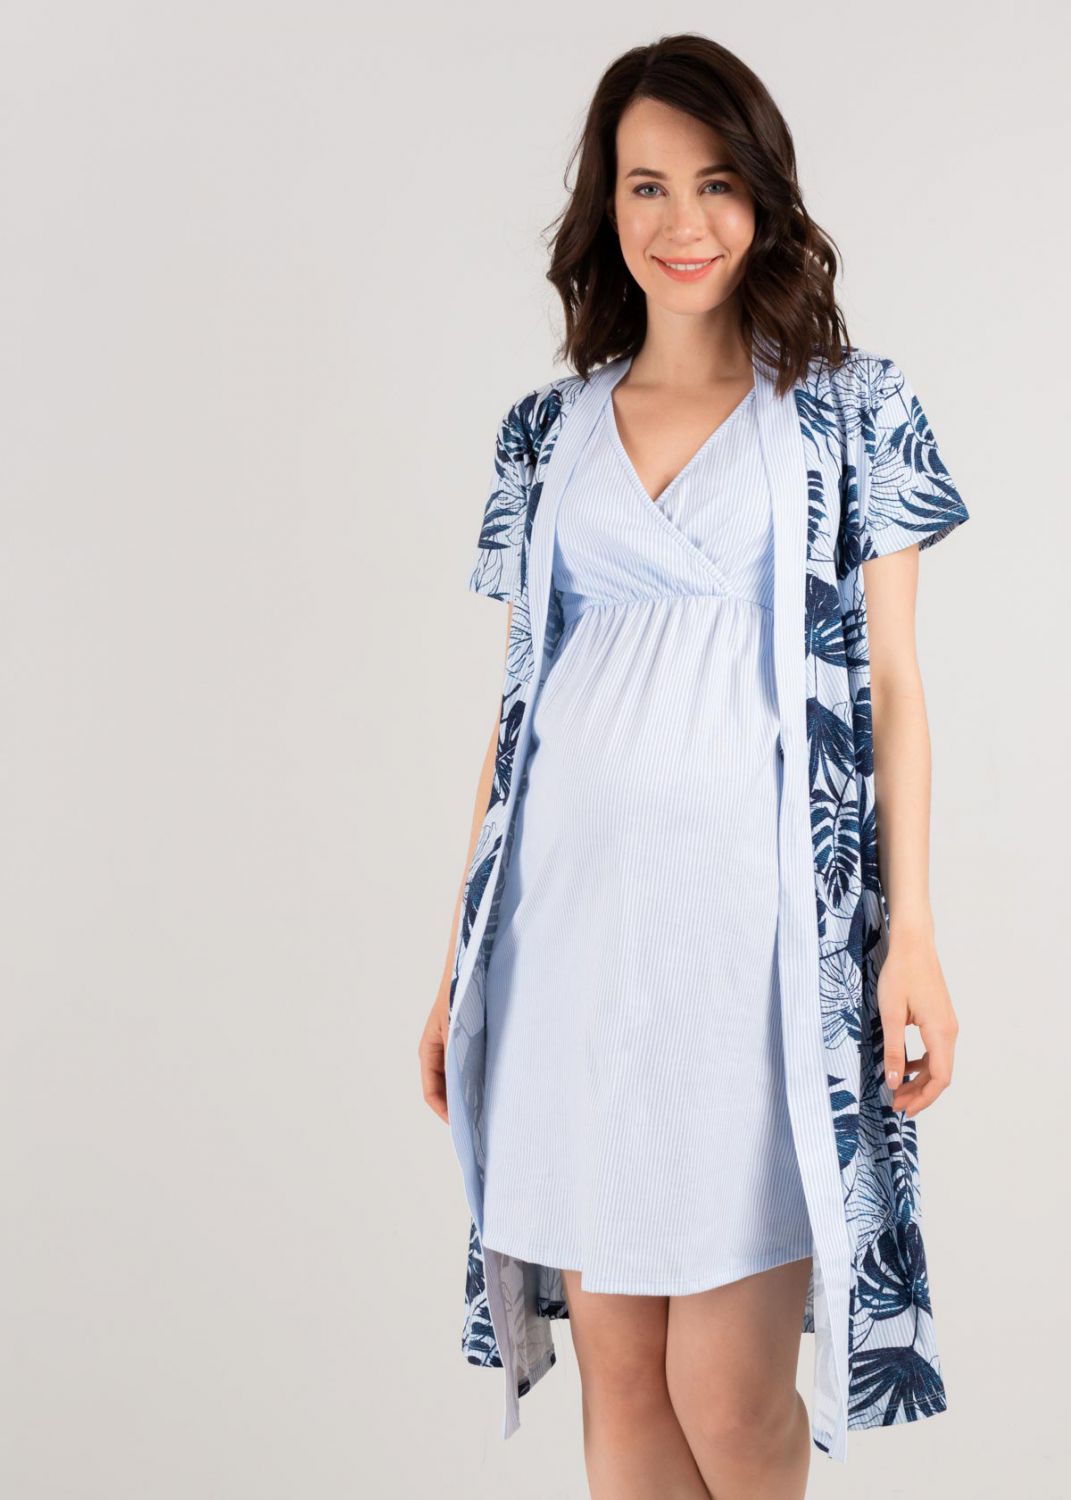 labor delivery gowns and hospital gowns by Dressed to Deliver